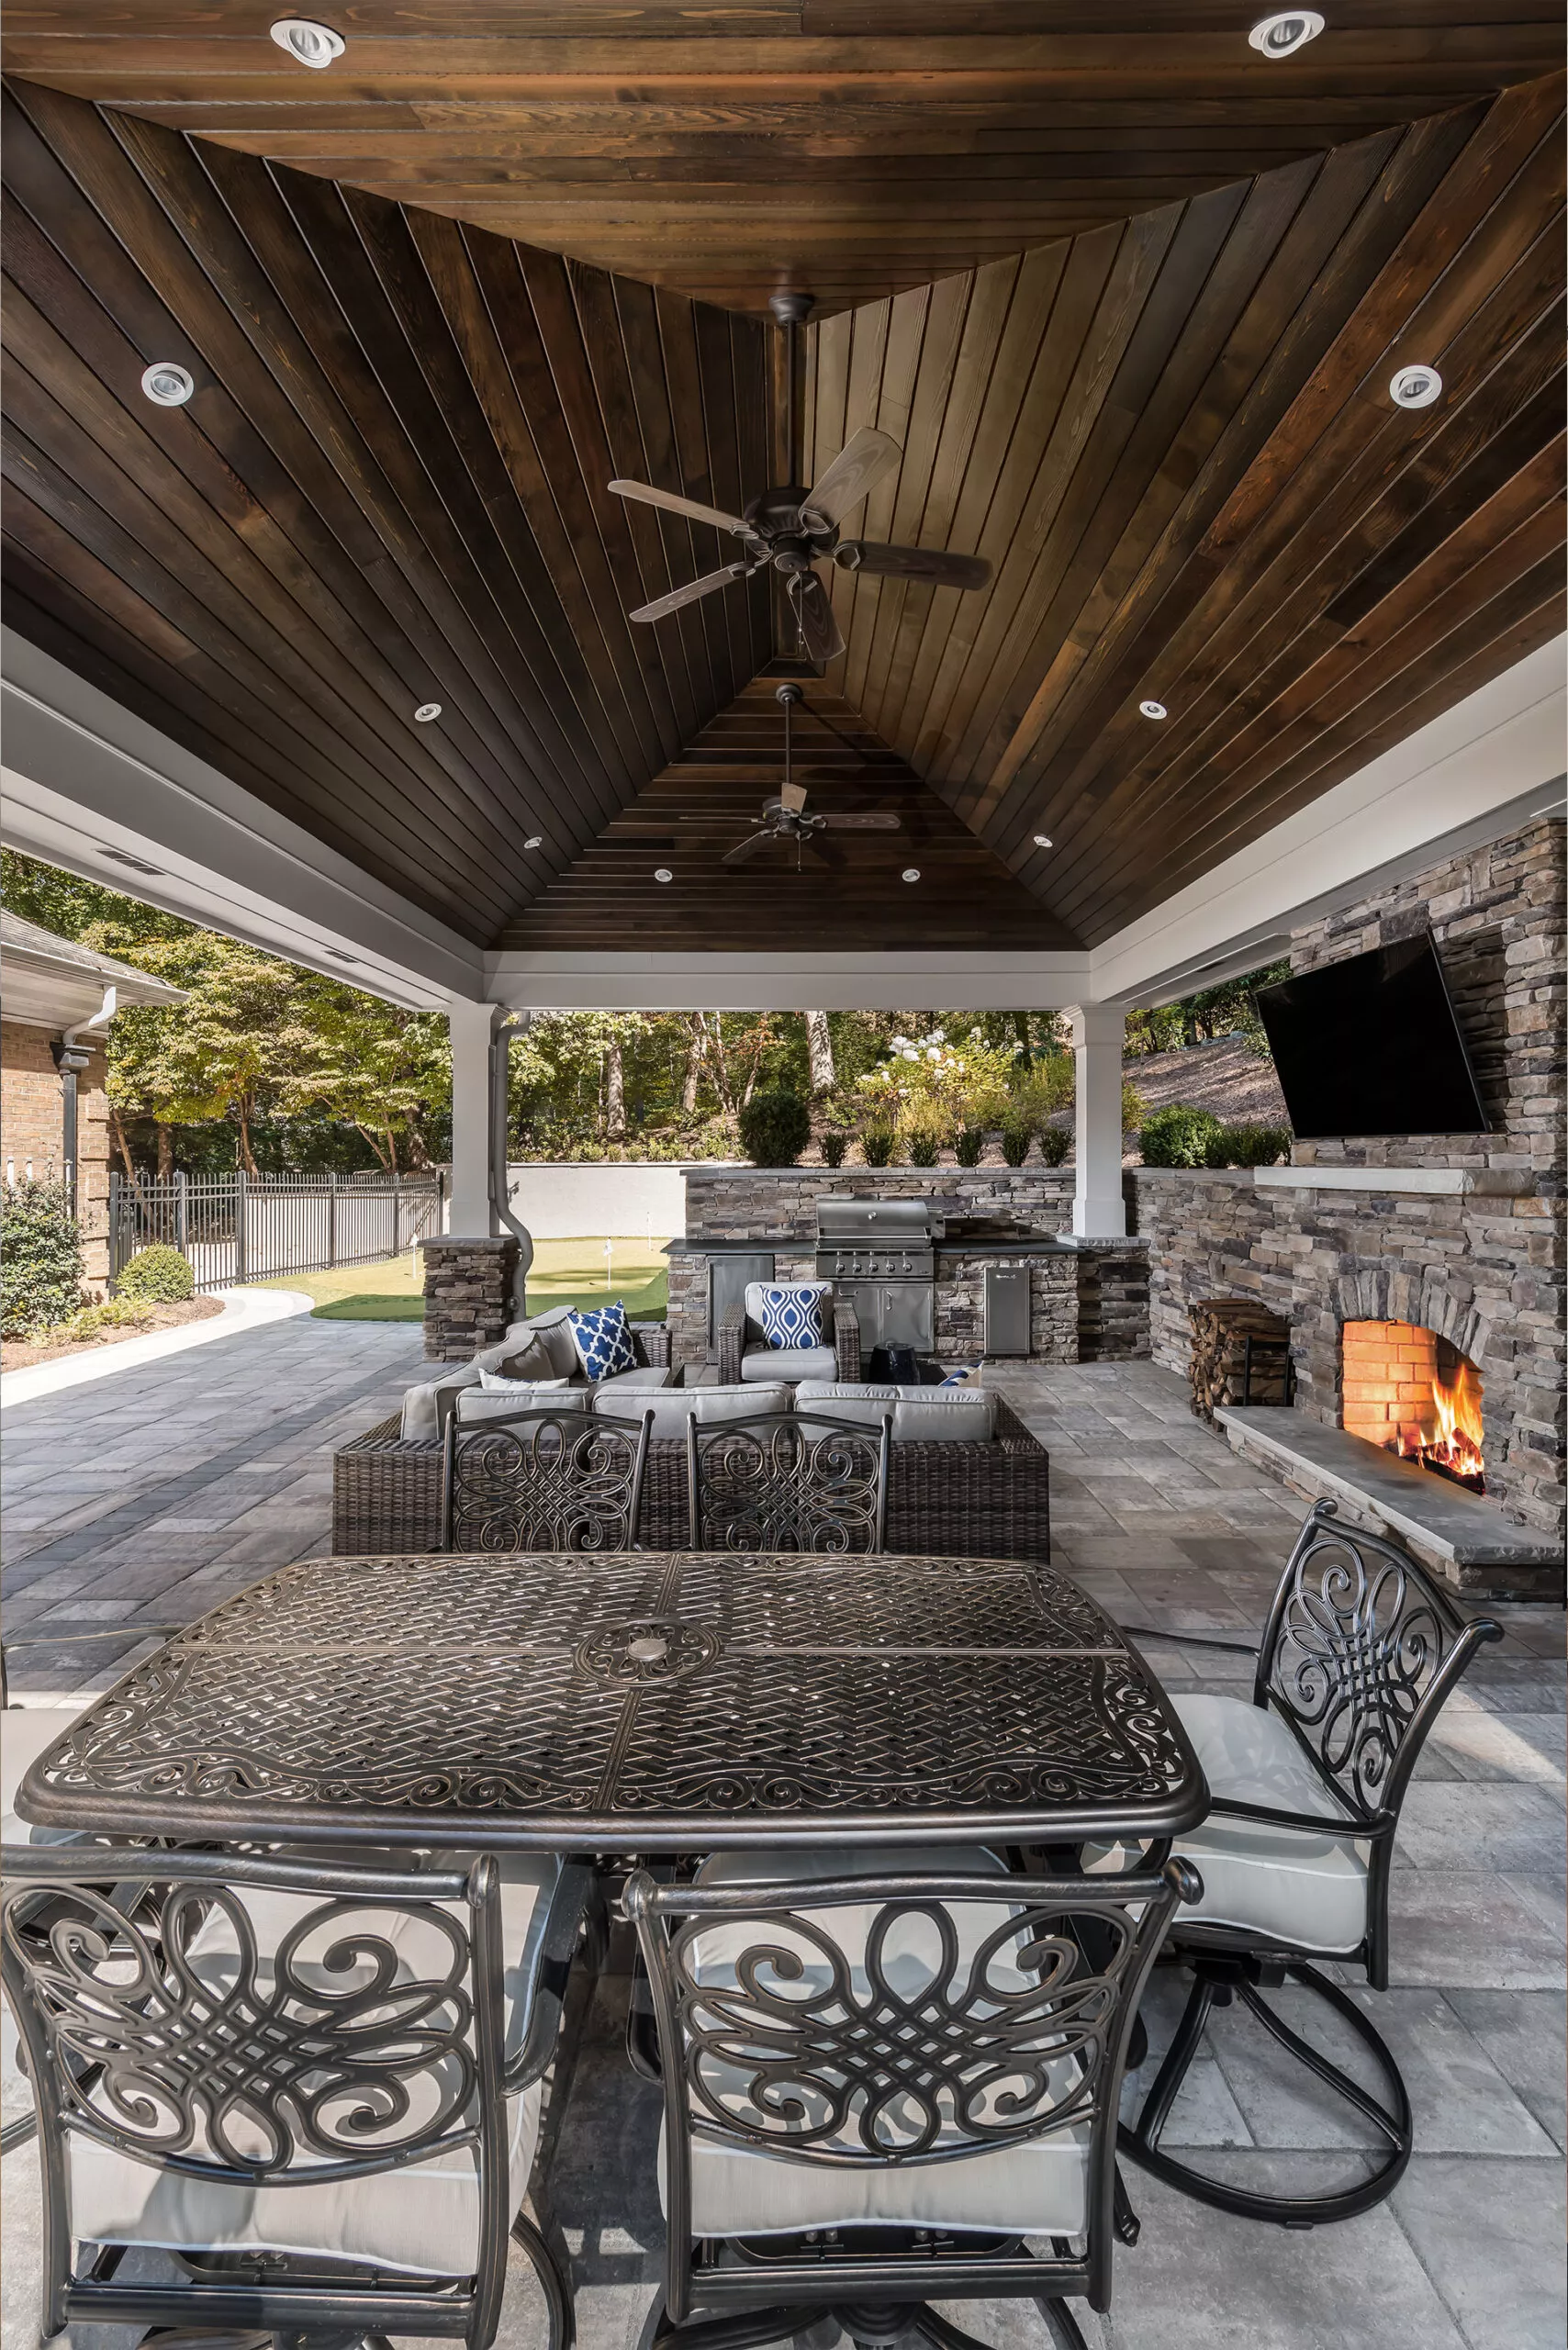 Home remodeling trends 2022 outdoor